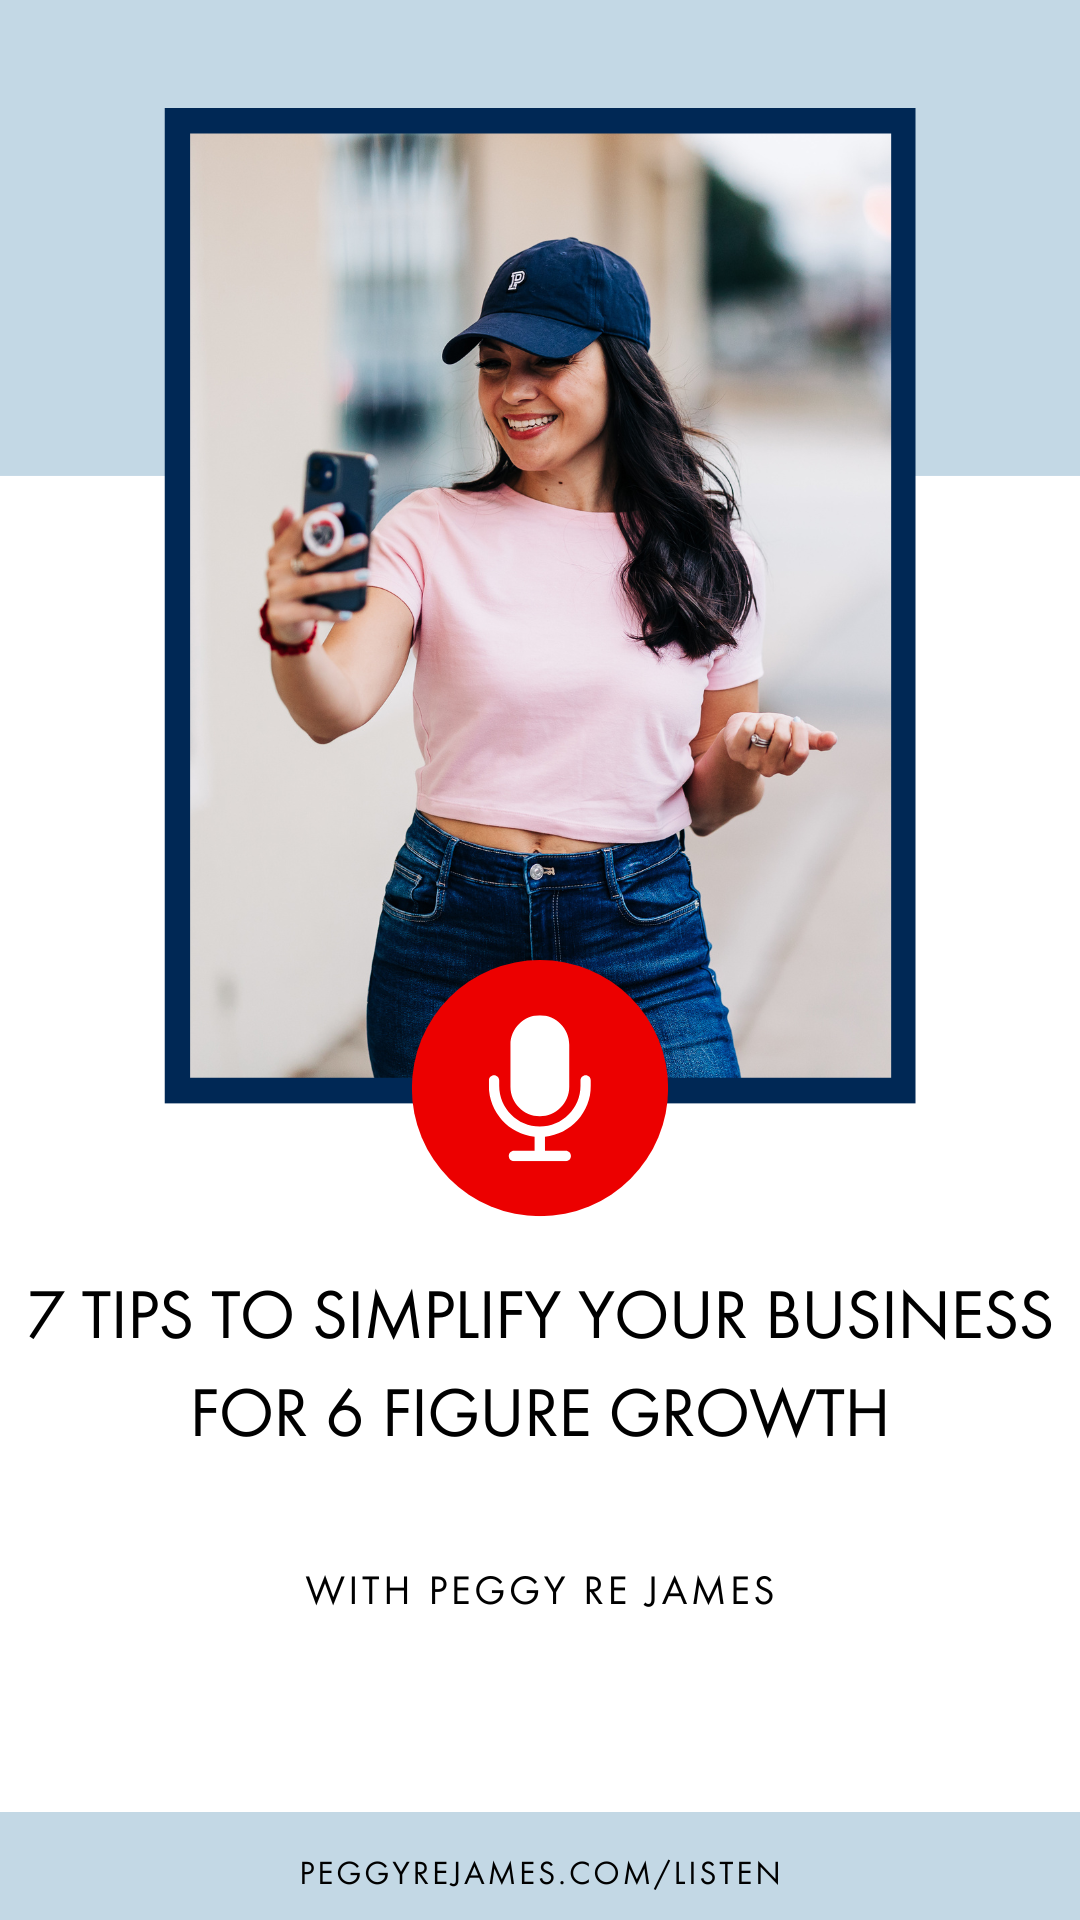 7 tips to simplify your business for 6 figure growth